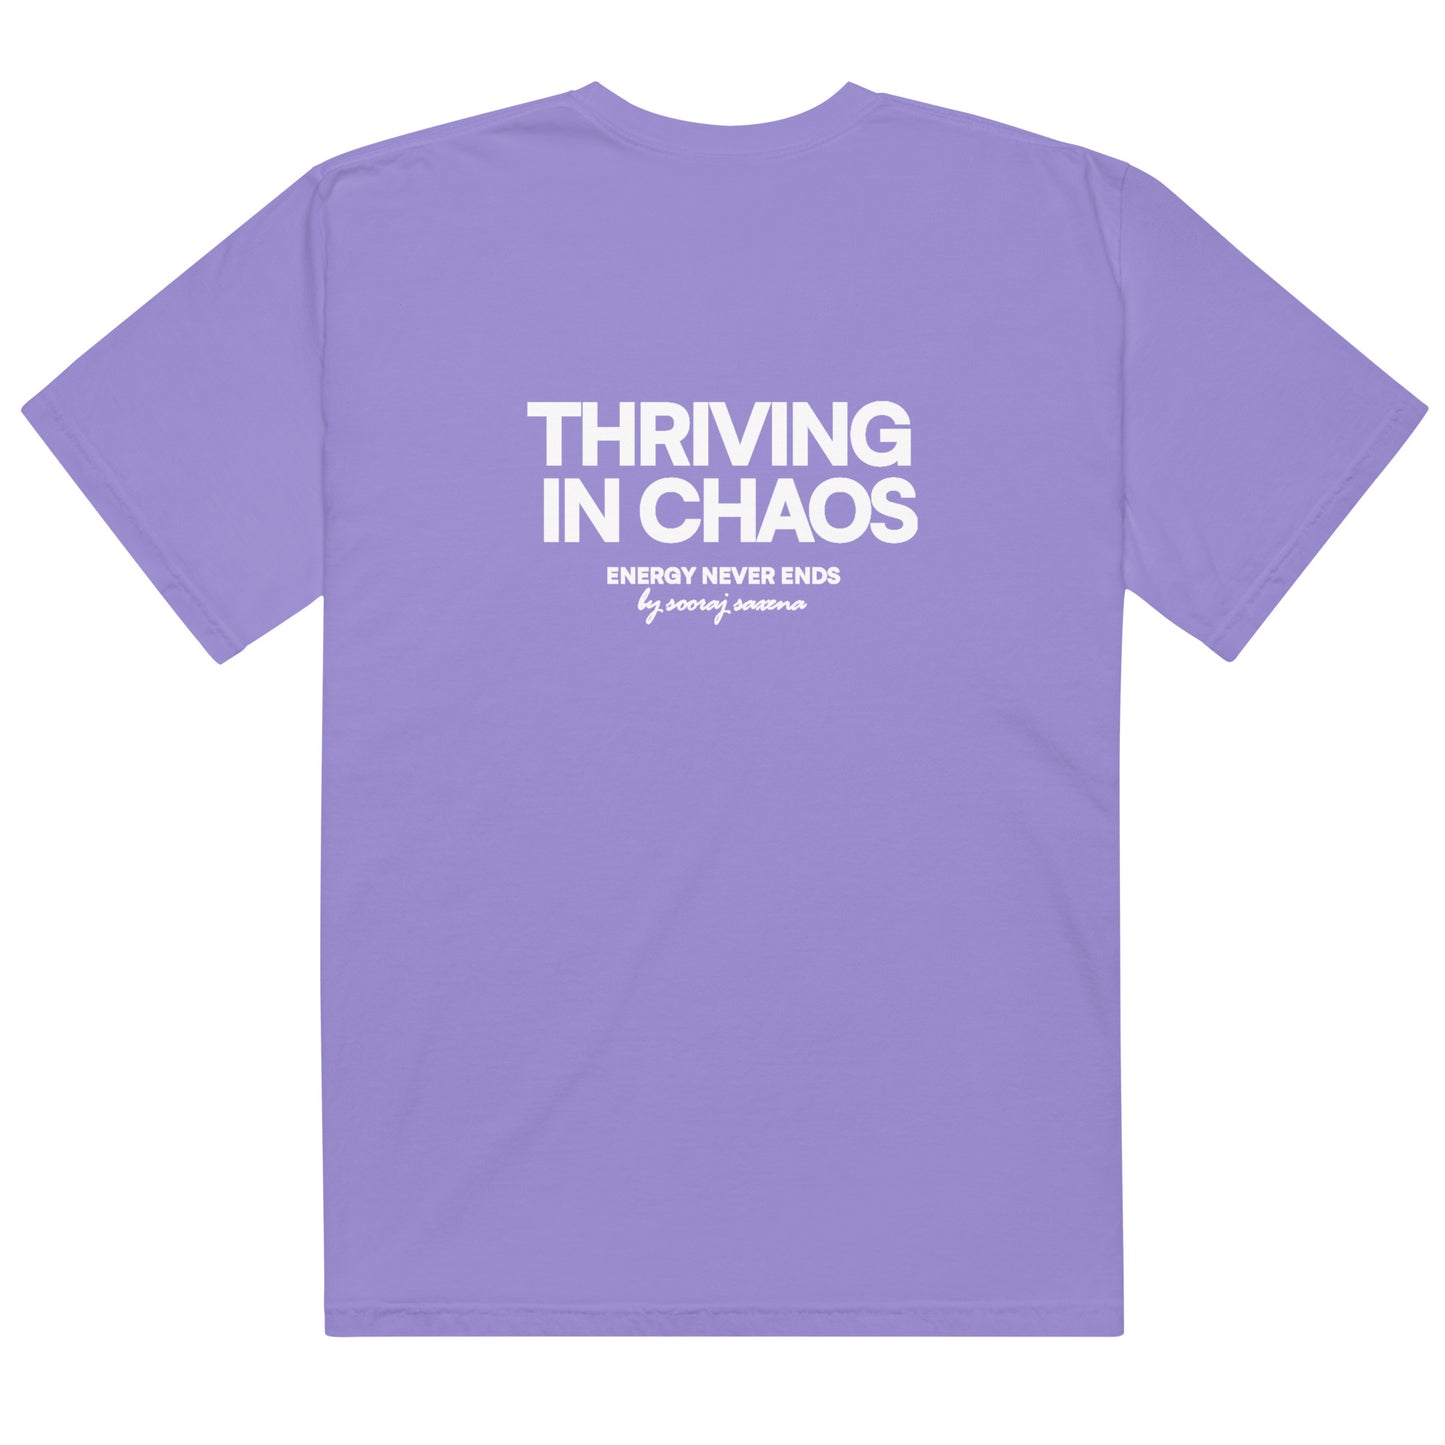 THRIVING IN CHAOS - VOL. 1 (T-SHIRT) VIOLET